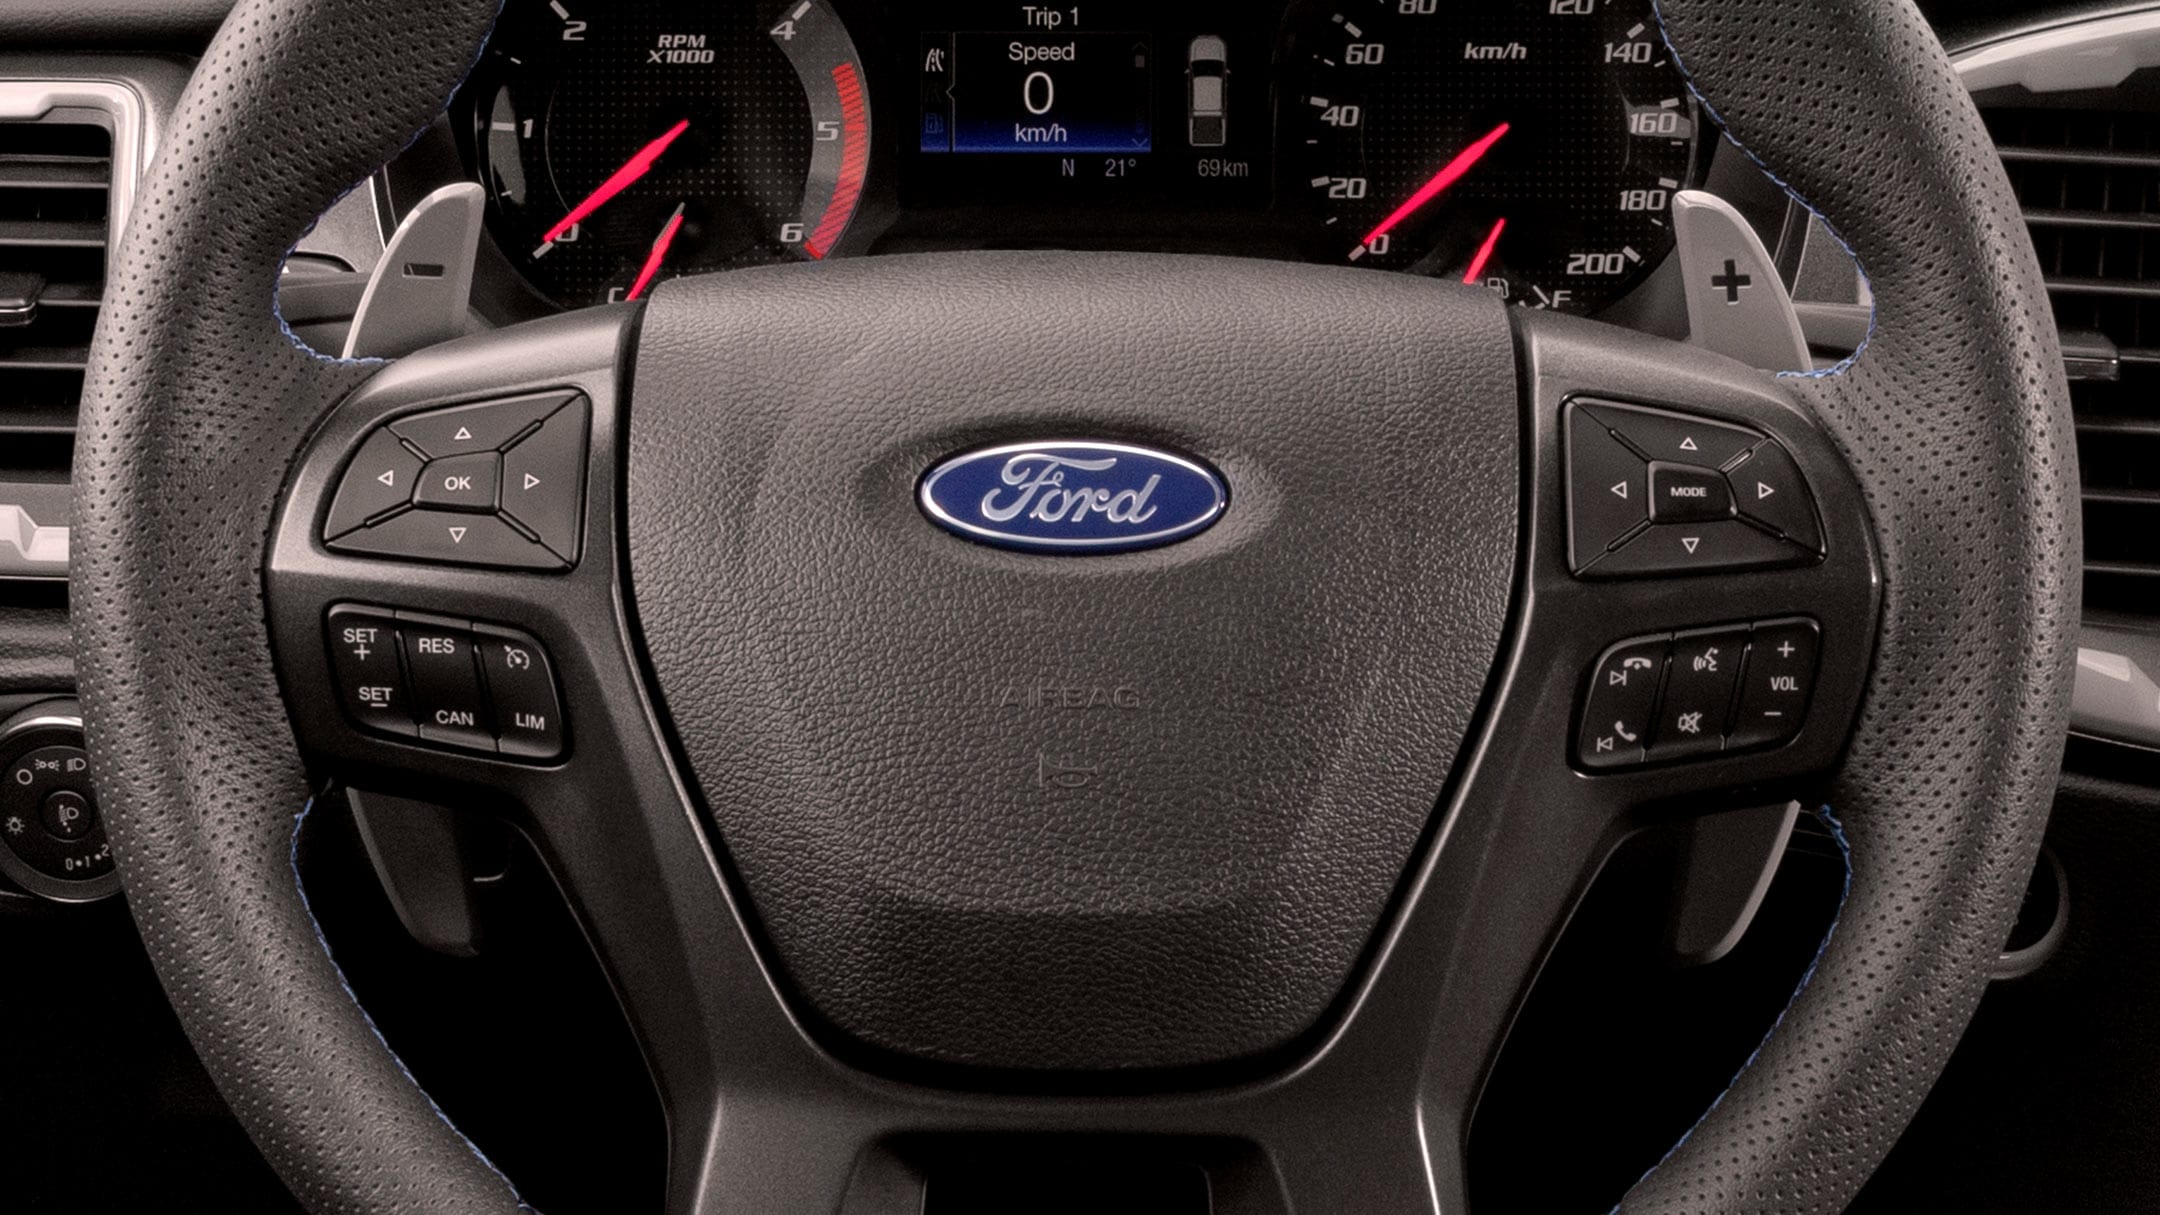 Ford Ranger interior with steering wheel and close up on Paddle shifters